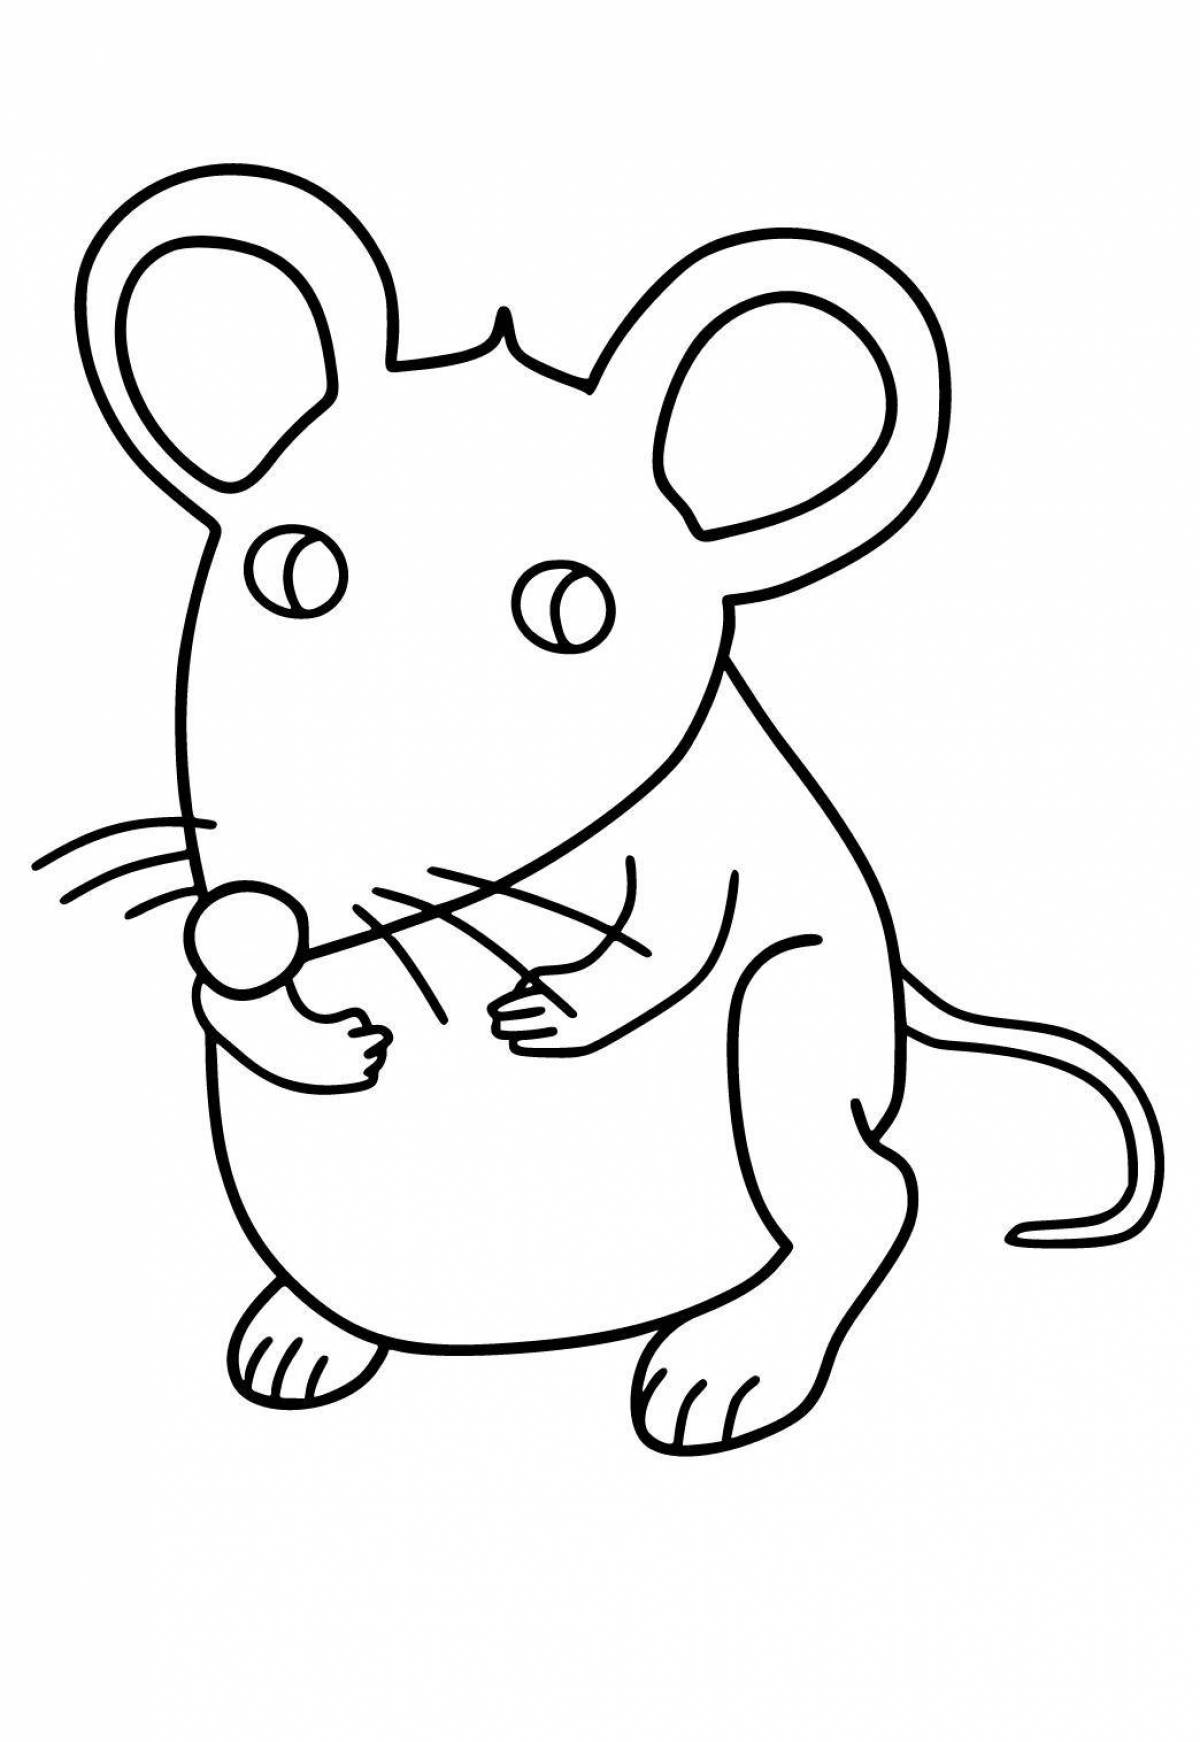 Attractive coloring of rodents